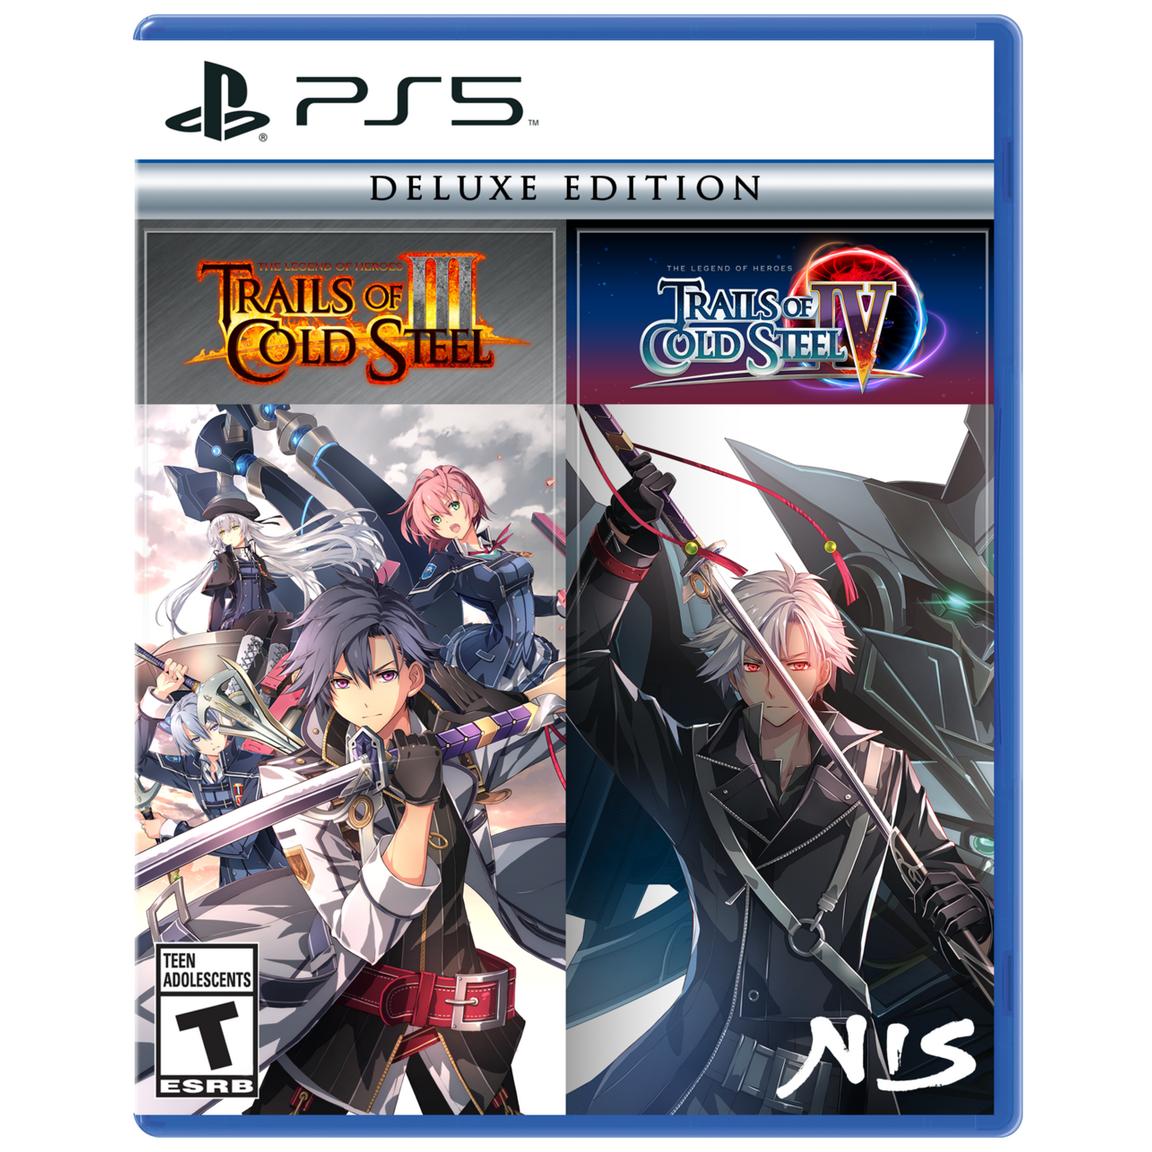 the legend of heroes trails into reverie deluxe edition ps5 английский язык Видеоигра The Legend of Heroes: Trails of Cold Steel III / The Legend of Heroes: Trails of Cold Steel IV - Deluxe Edition - PlayStation 5